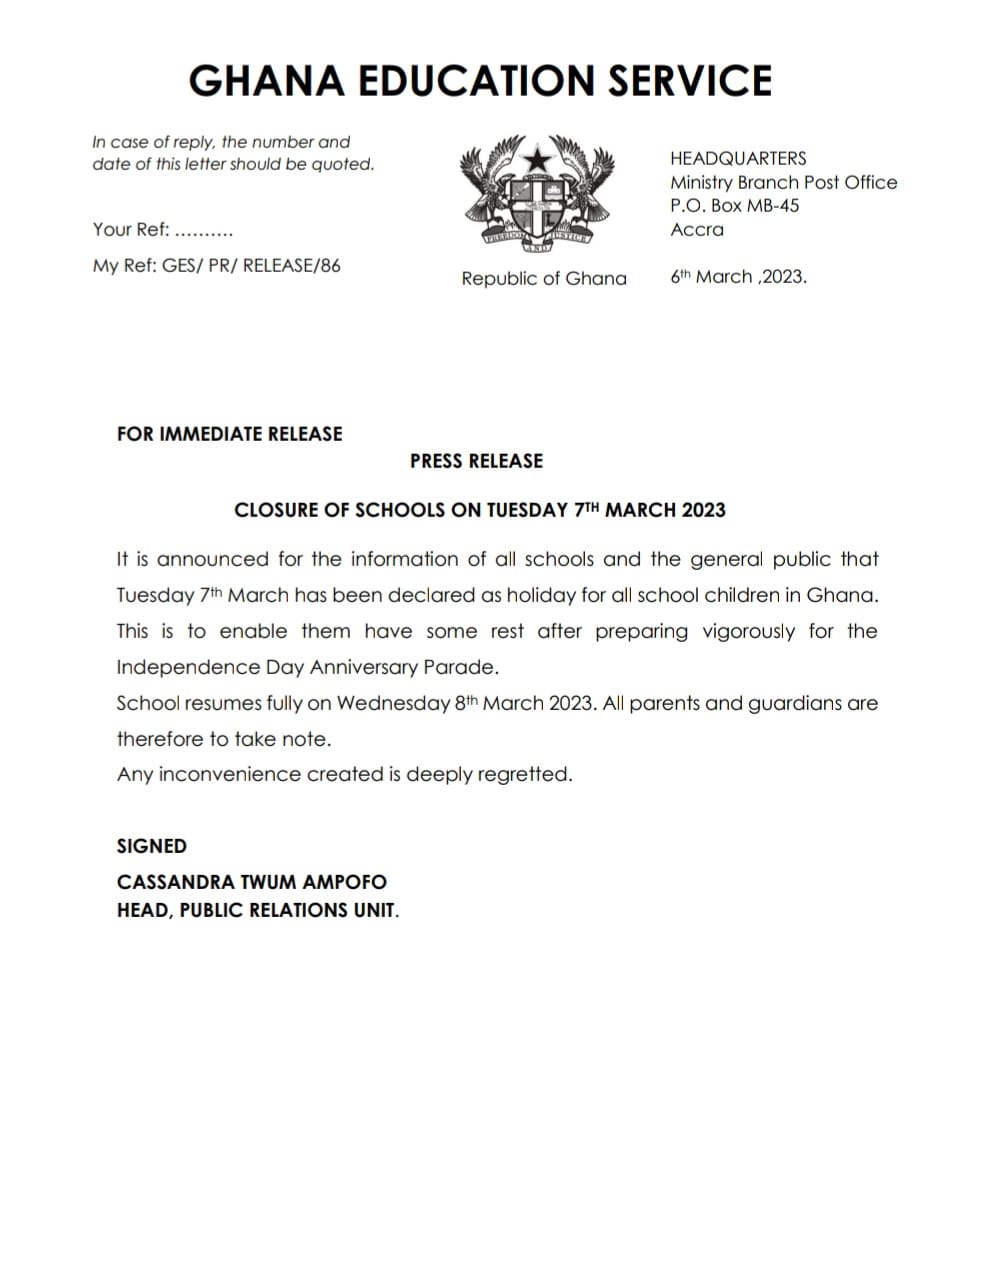 GES: Update on Closure of Schools On Tuesday 7th March, 2023